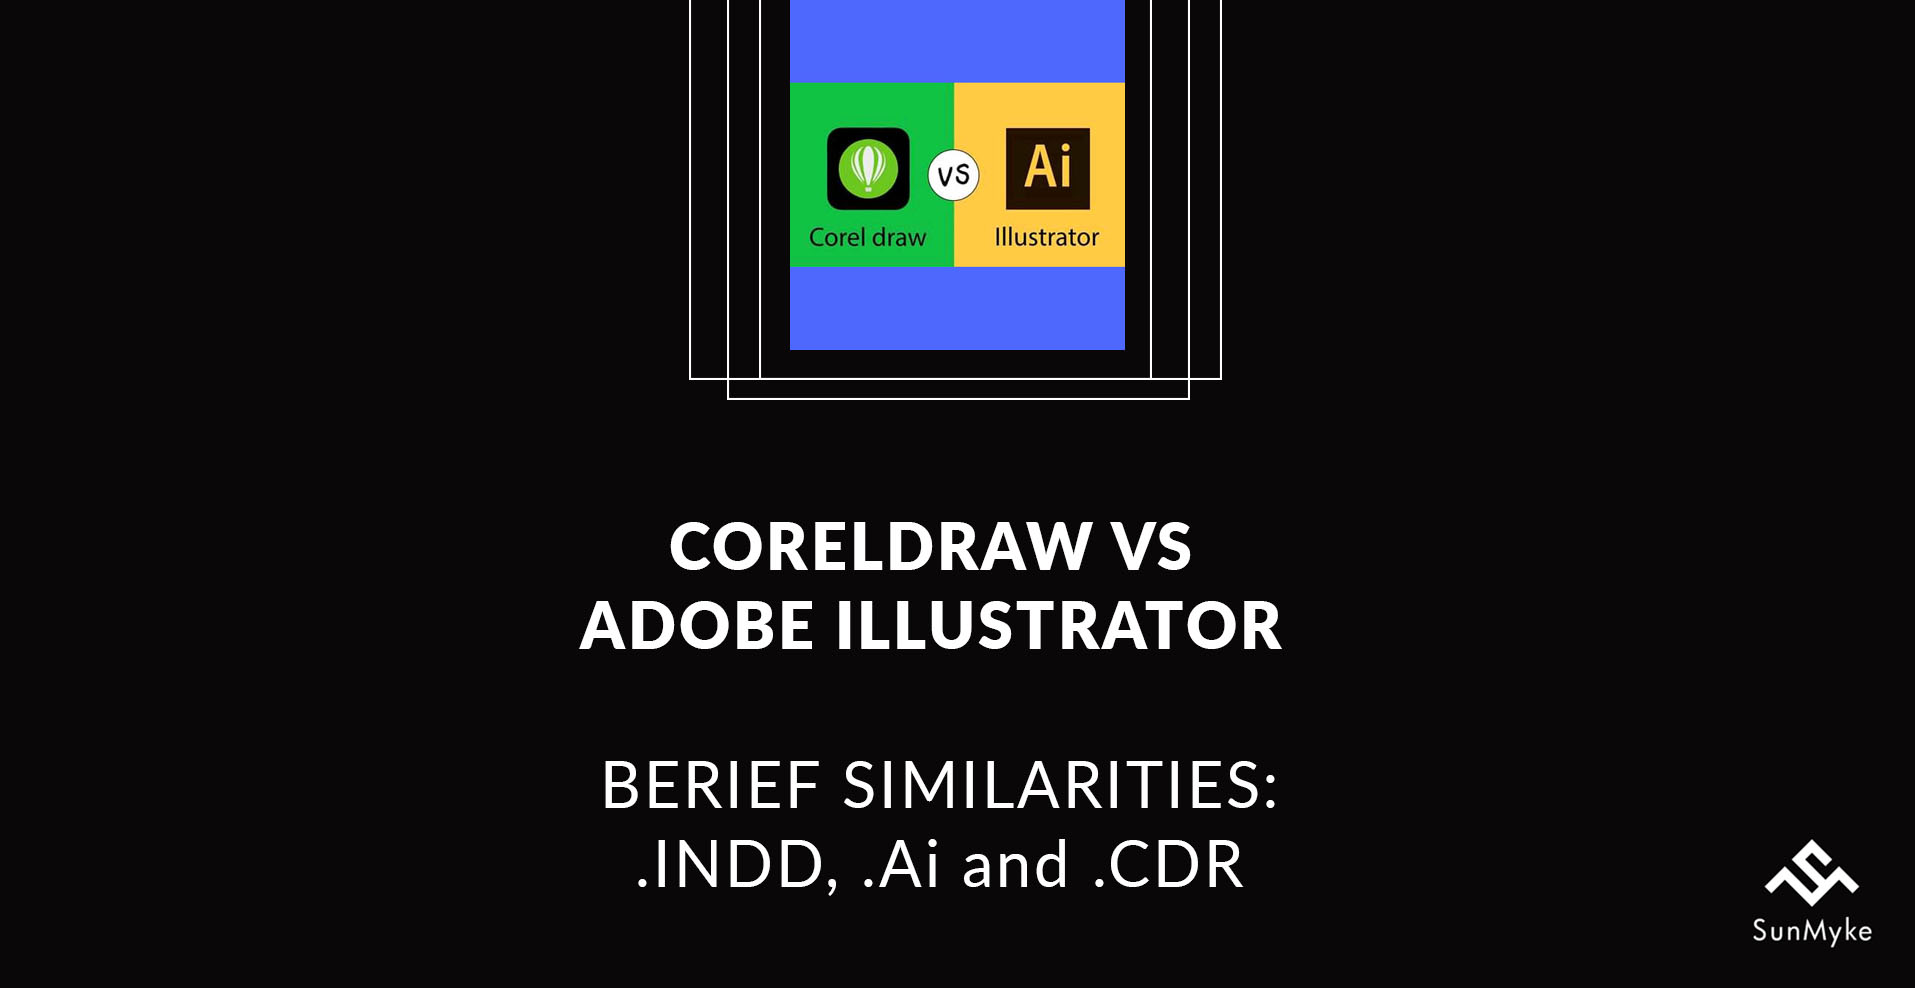 Corel X8 still fills some letters when importing curved PDFs (even from CS2  - see example) - CorelDRAW X8 - CorelDRAW Graphics Suite X8 - CorelDRAW  Community